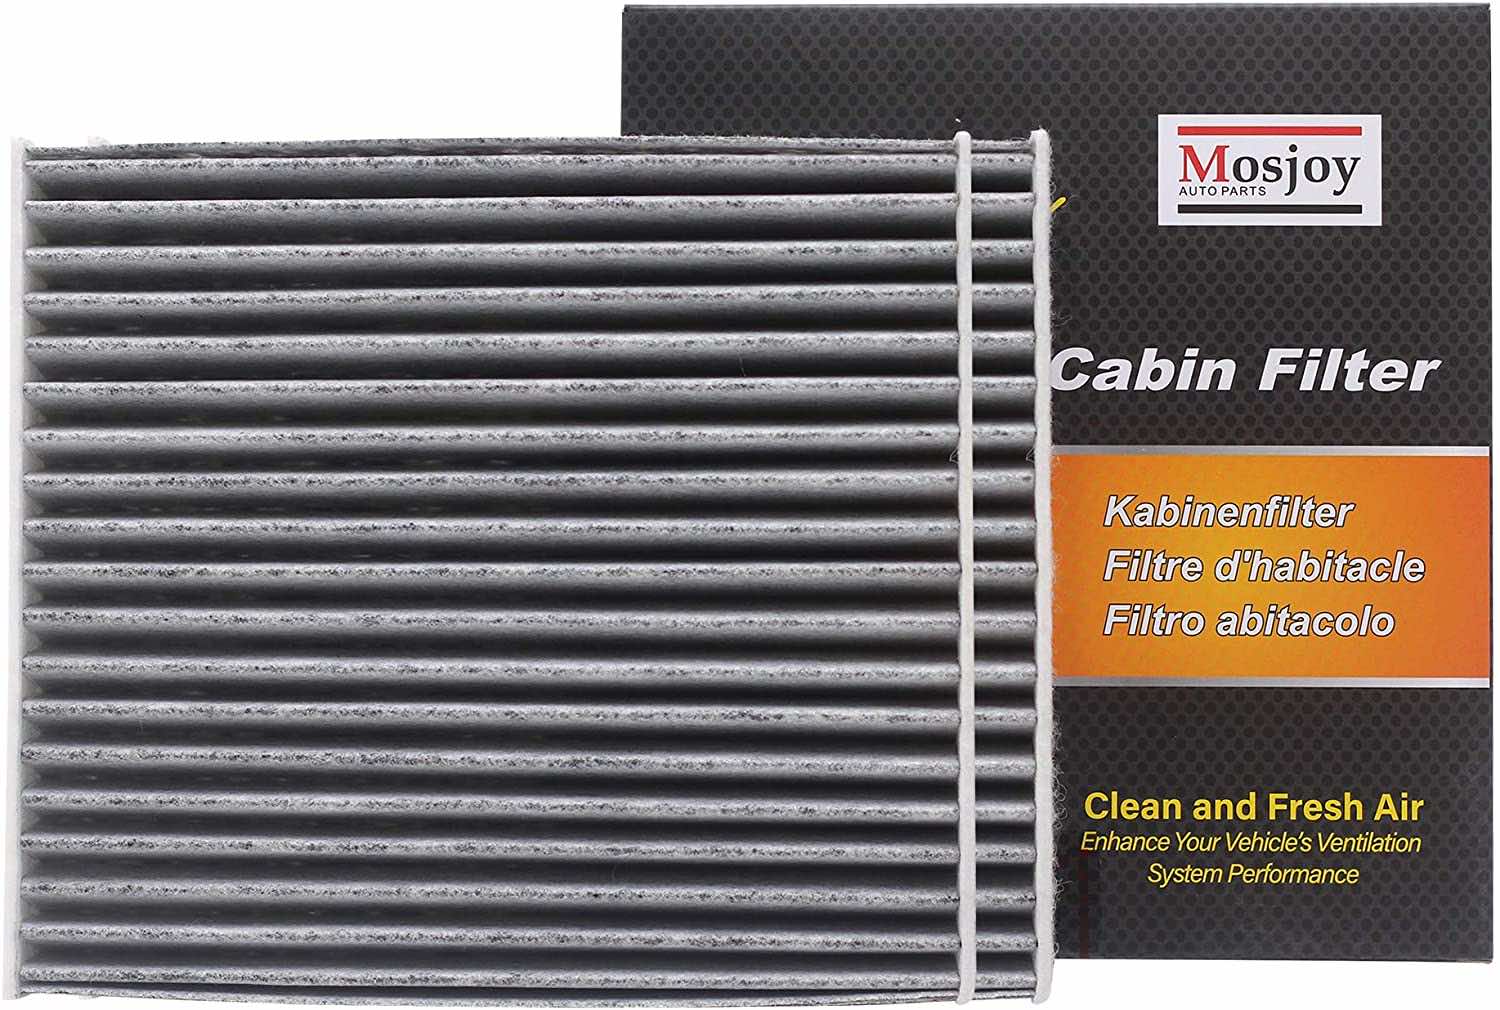 10 Best Air Filters for Toyota Corolla